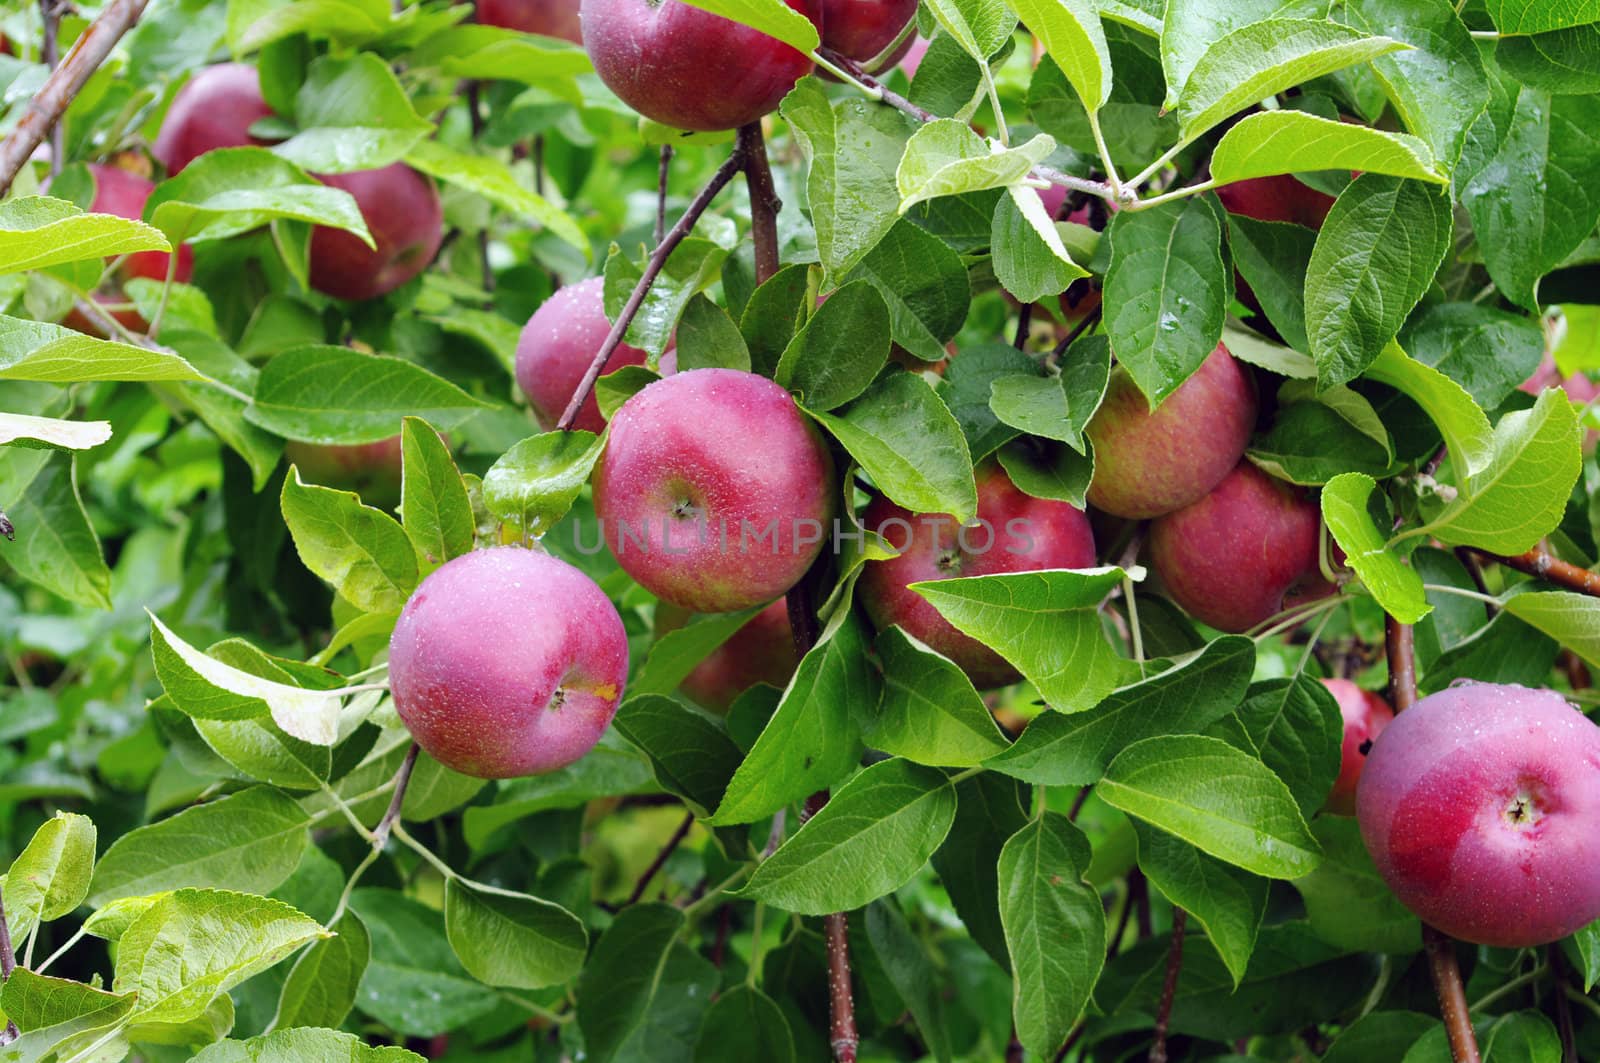 Branches loaded with red apples ready to pick 